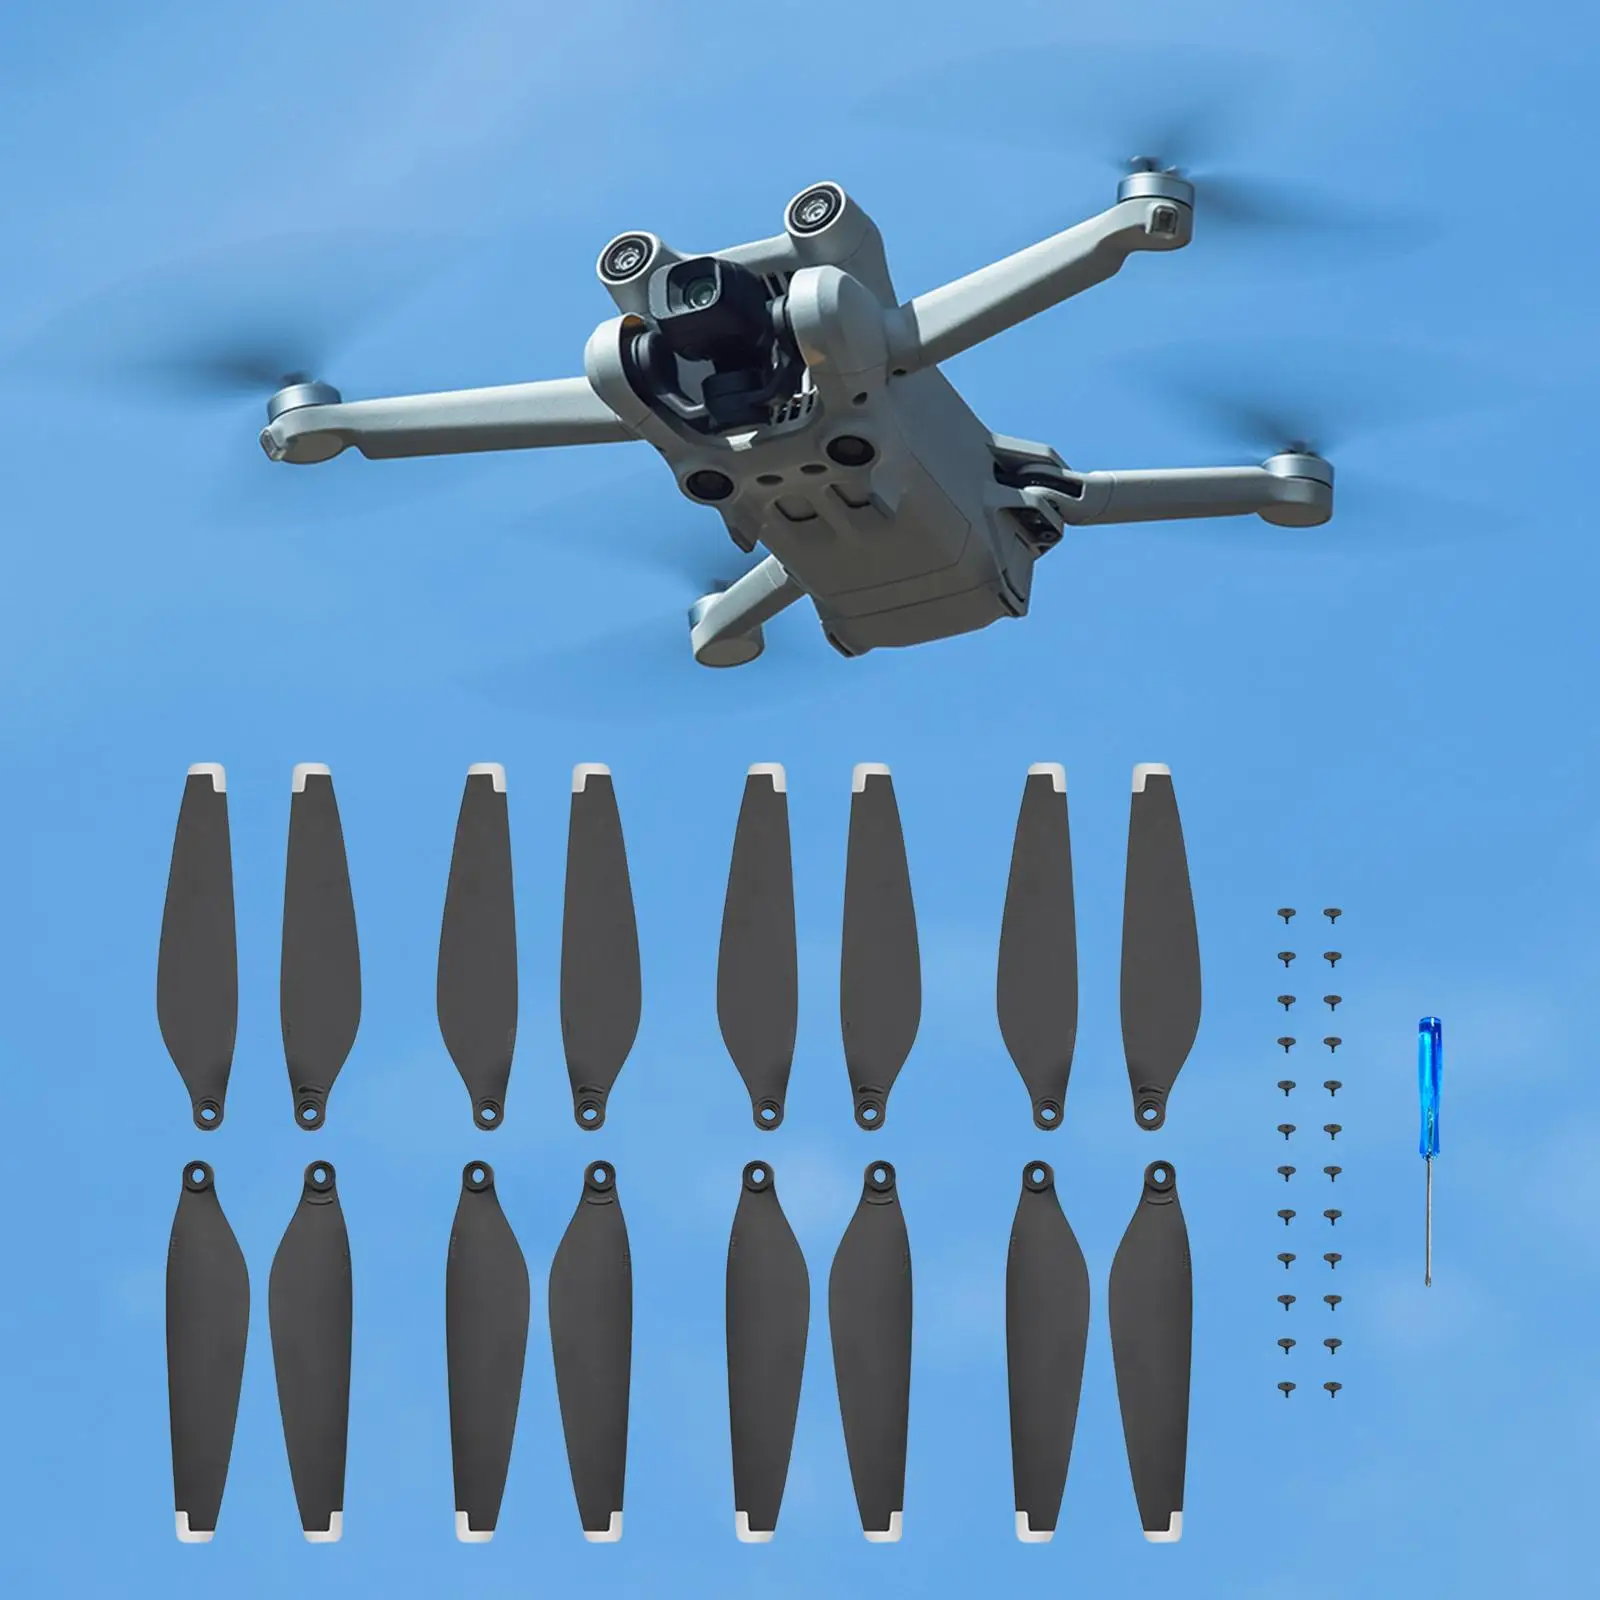 Propellers Silver Edge Replaces Lightweight High Performance Professional Spare Parts Spare Blades for Mavic Mini 3 Pro